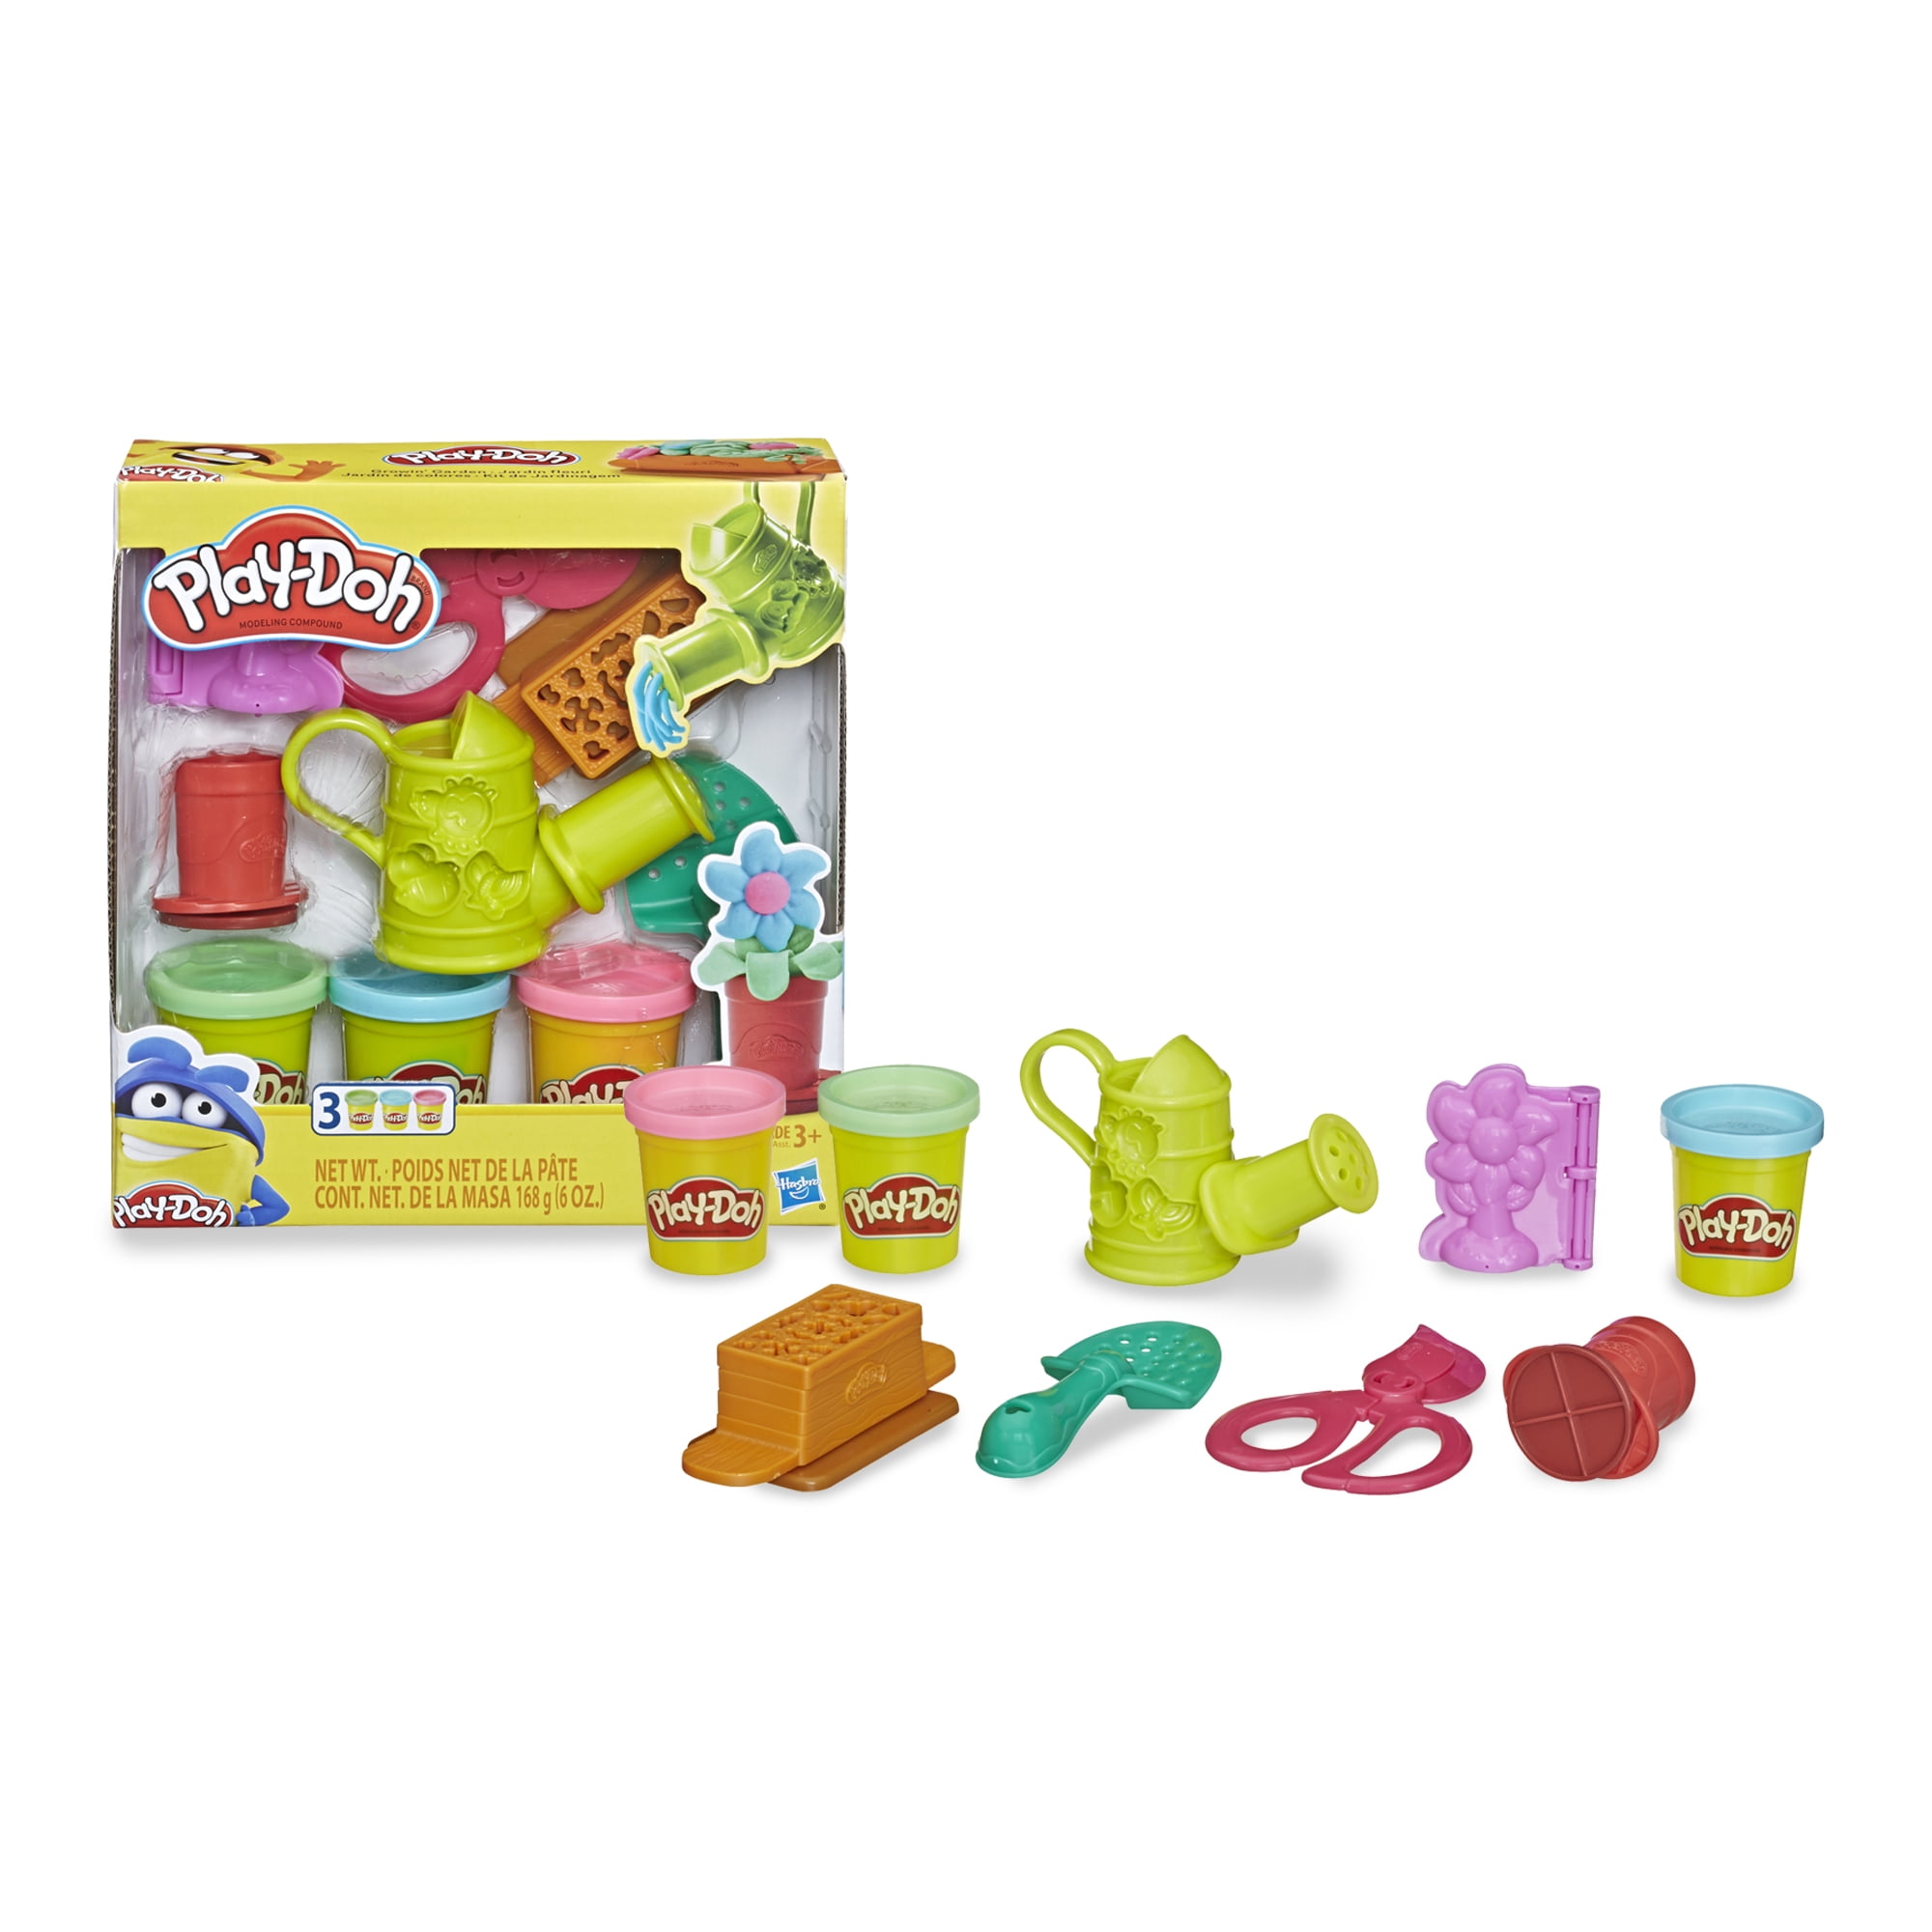 Play Doh Growin' Garden Tool Set Kids Toy w/ 3 Colors Lot of 3 3 Pack New 